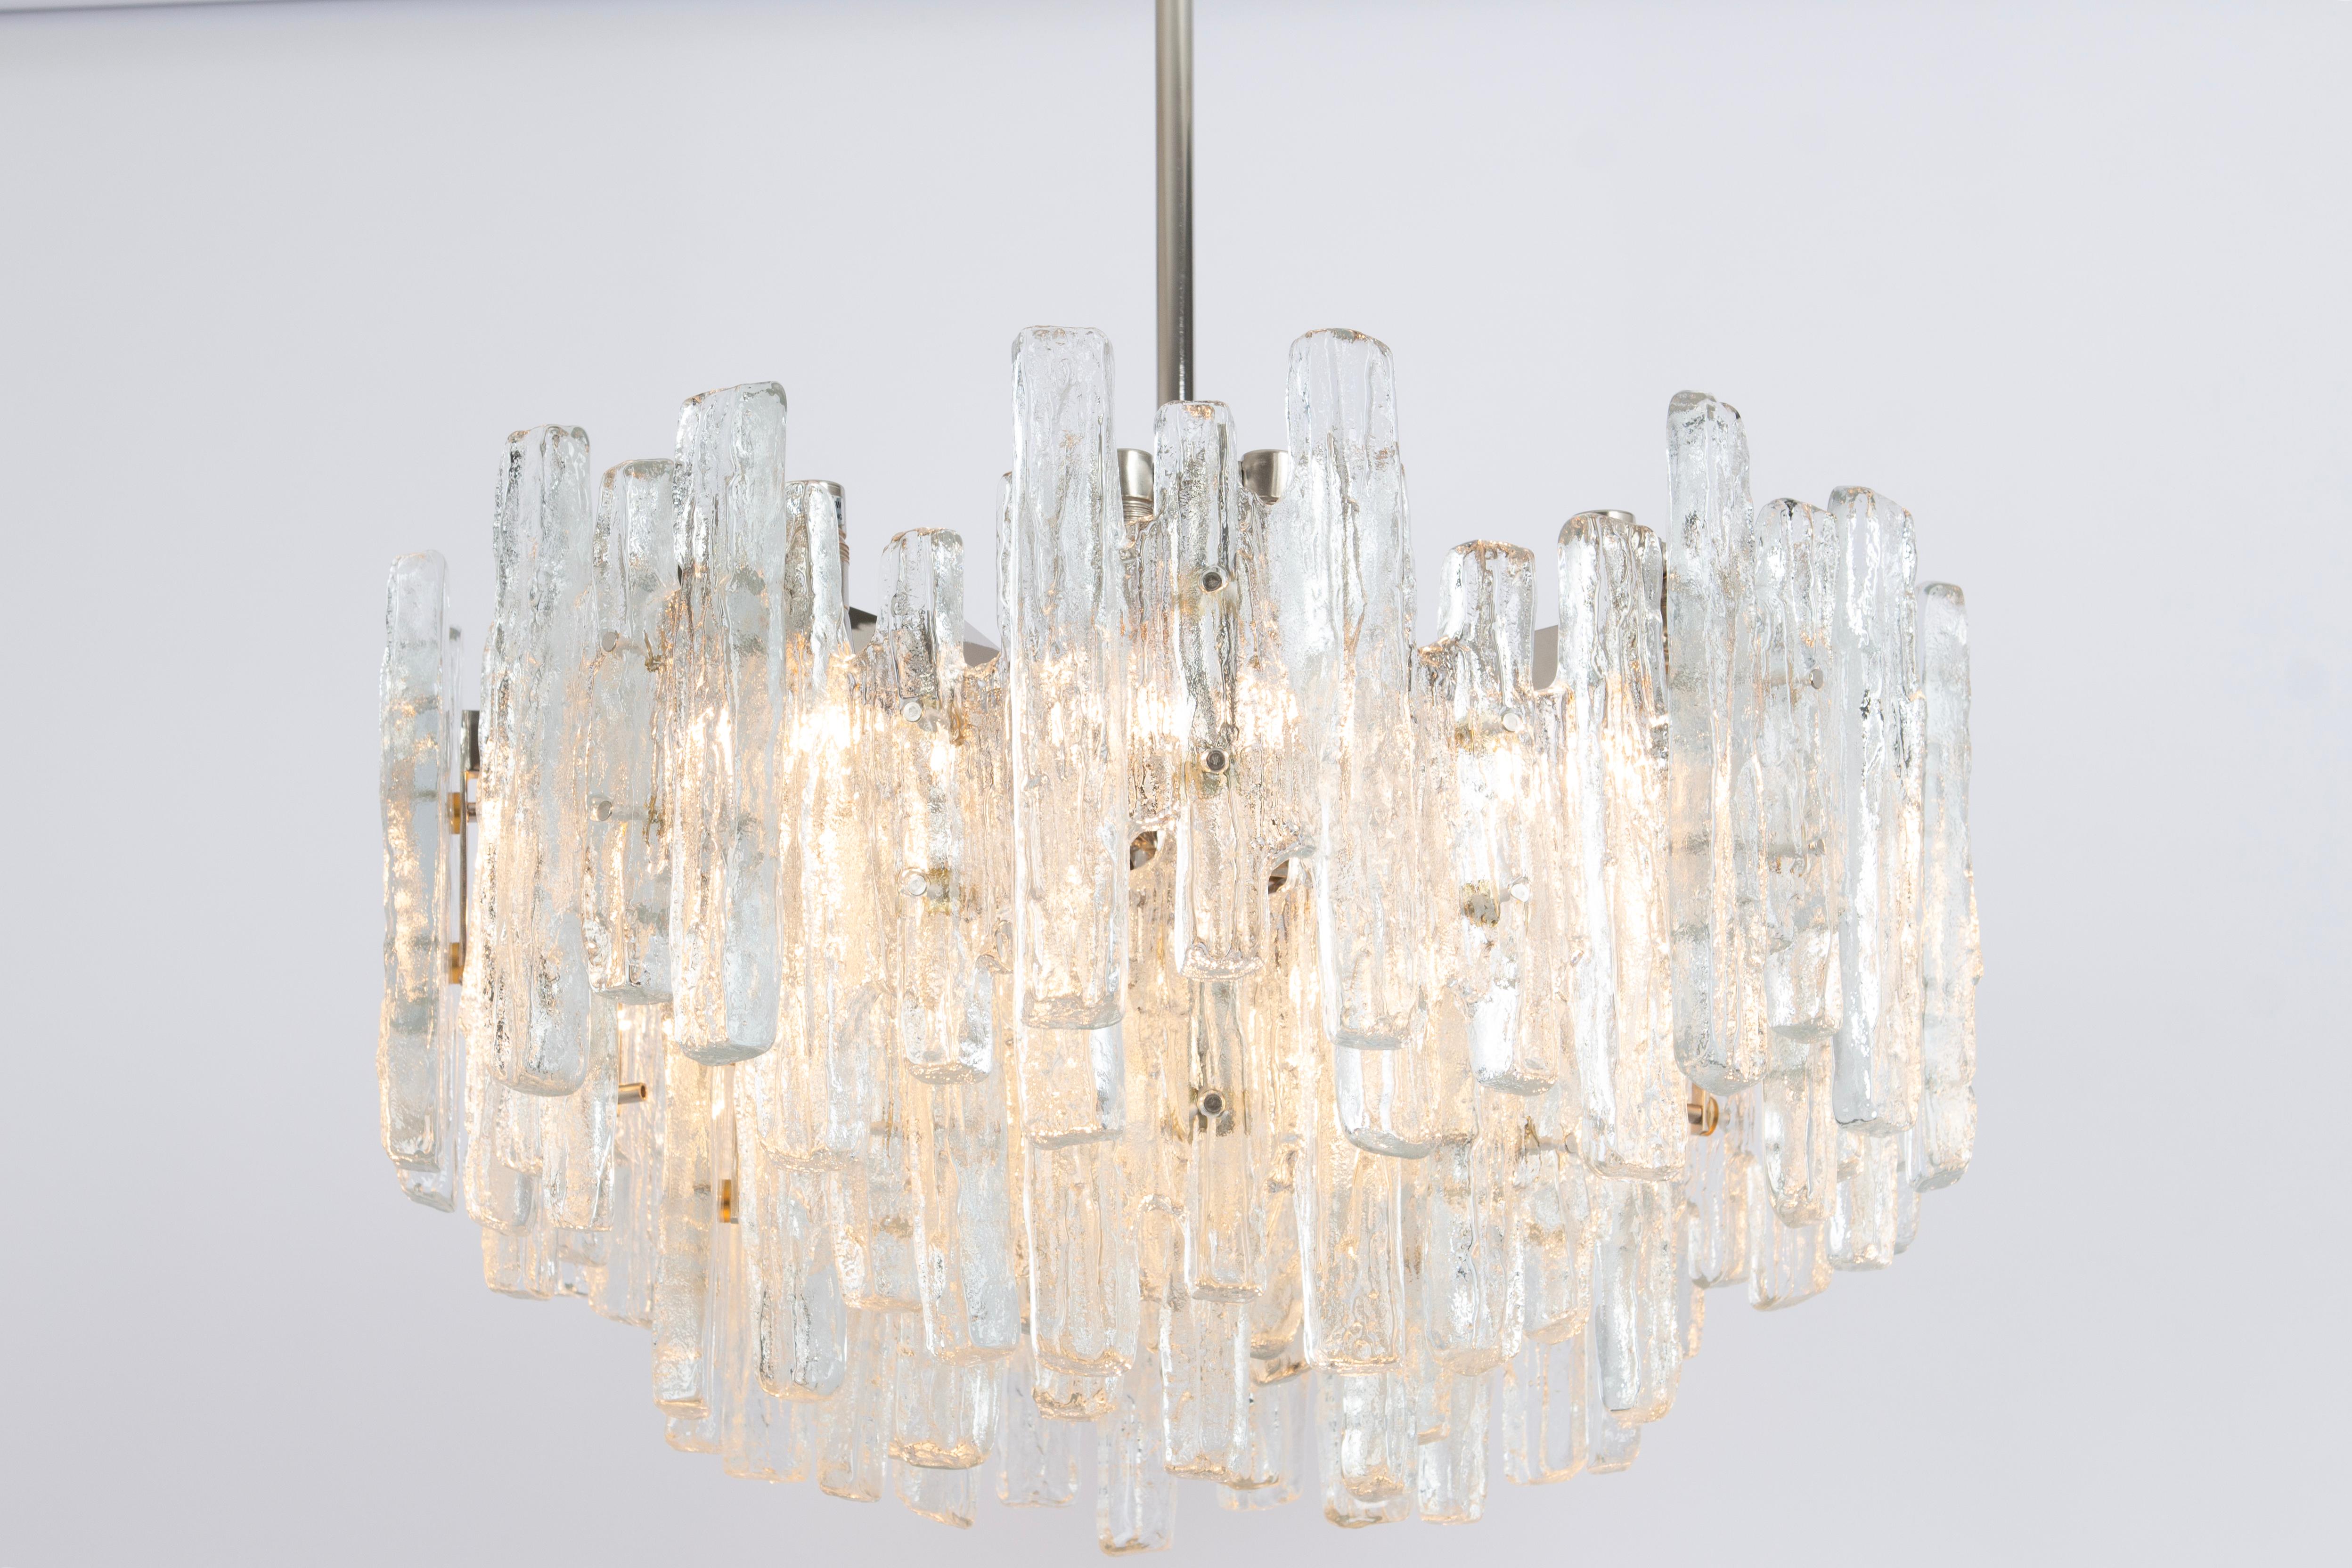 Large Rare Murano Ice Glass Chandelier by Kalmar, Austria, 1960s For Sale 5